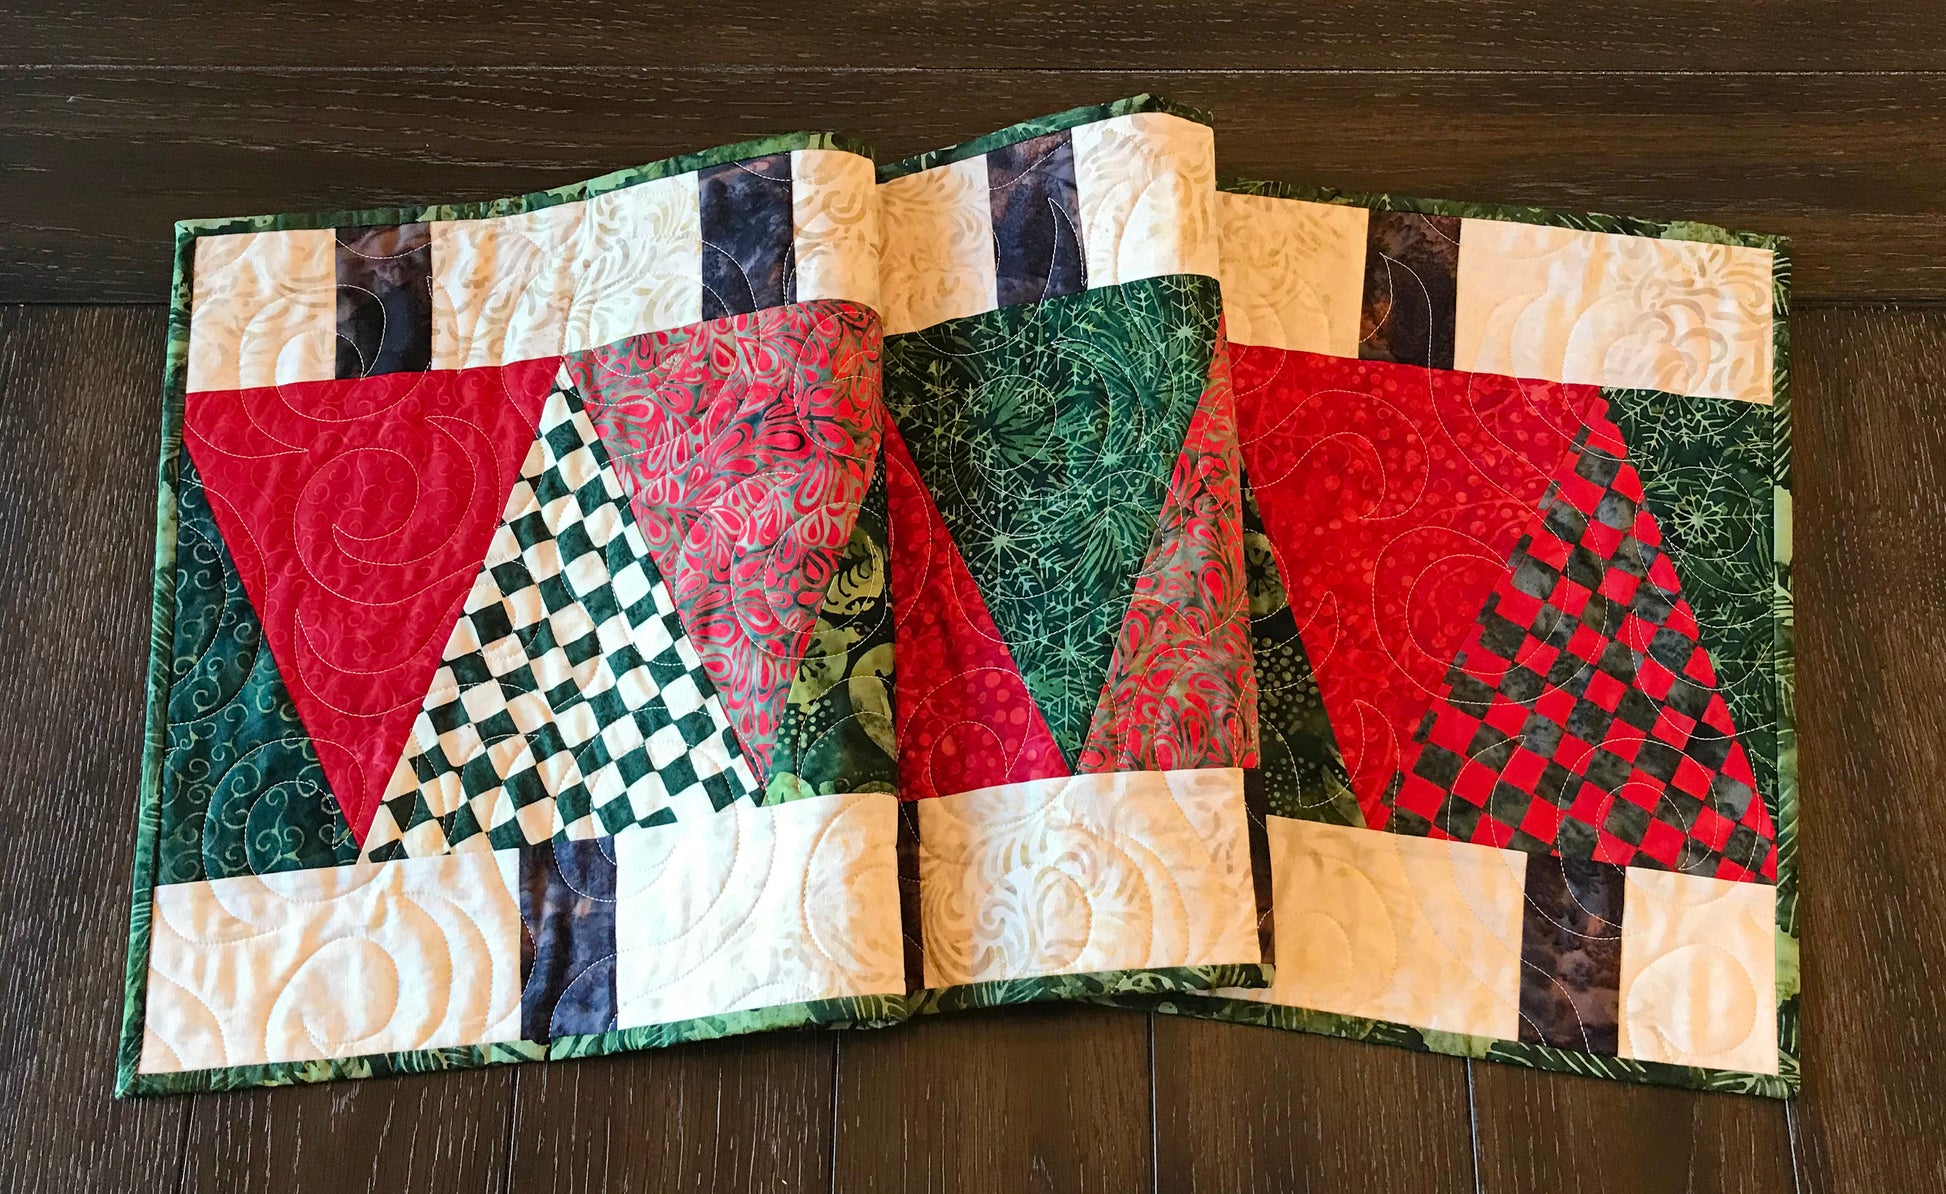 Christmas Tree Lane Table Runner Pattern - Digital Pattern - Handmade Quilts, Digital Patterns, and Home Décor items online - Cuddle Cat Quiltworks